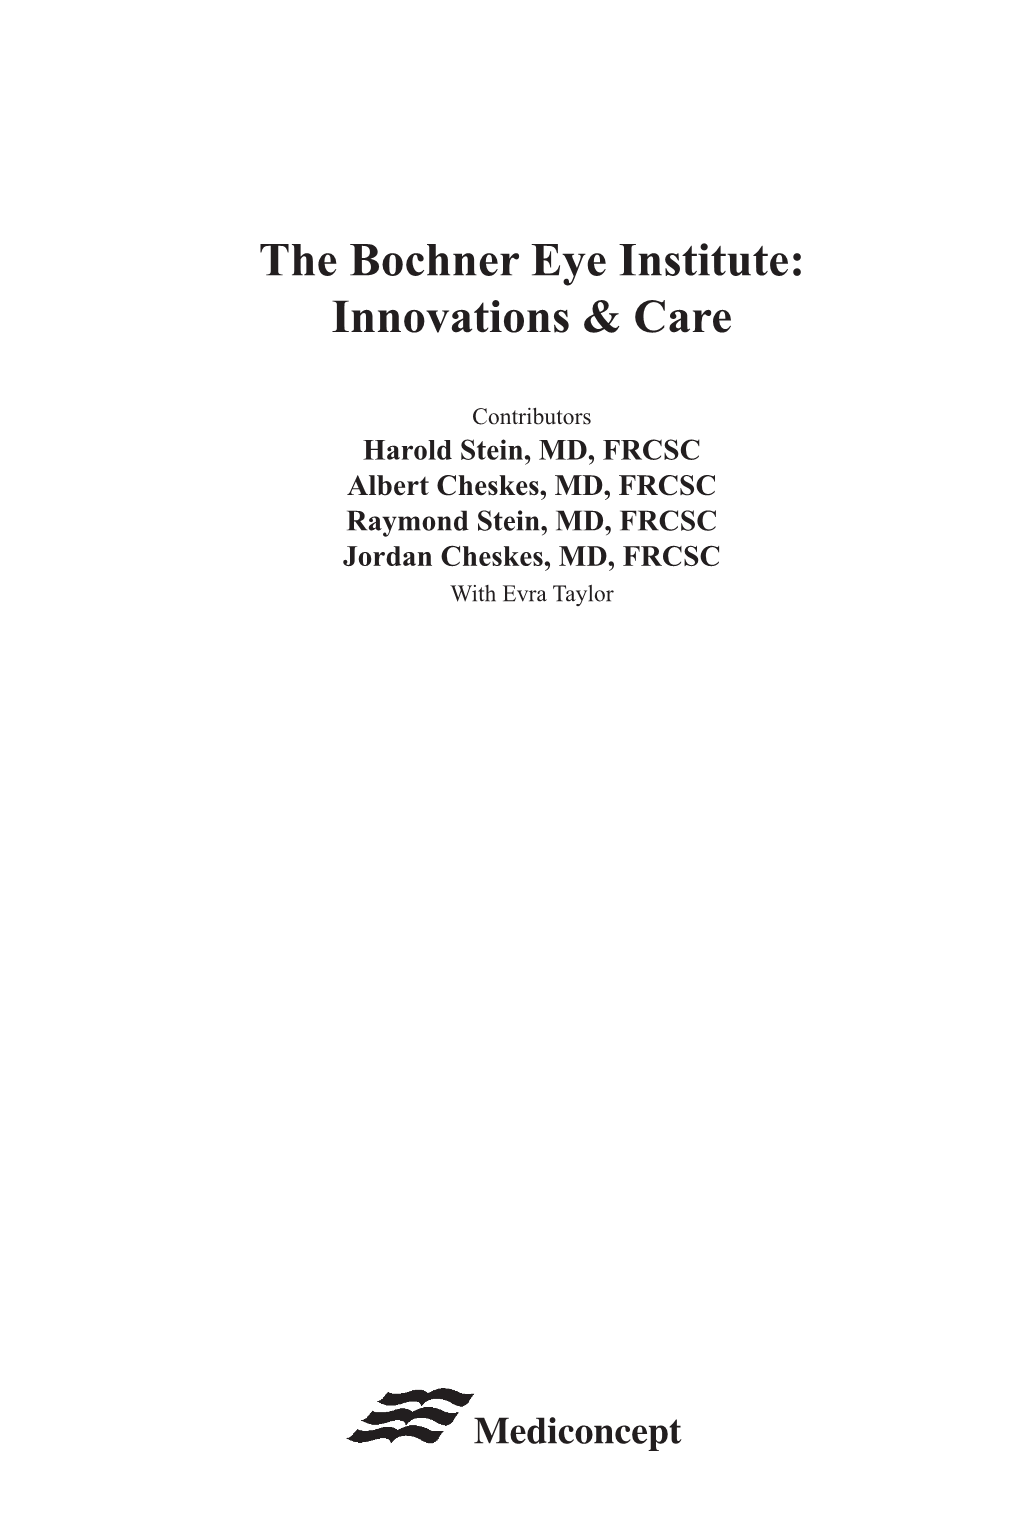 Innovations & Care